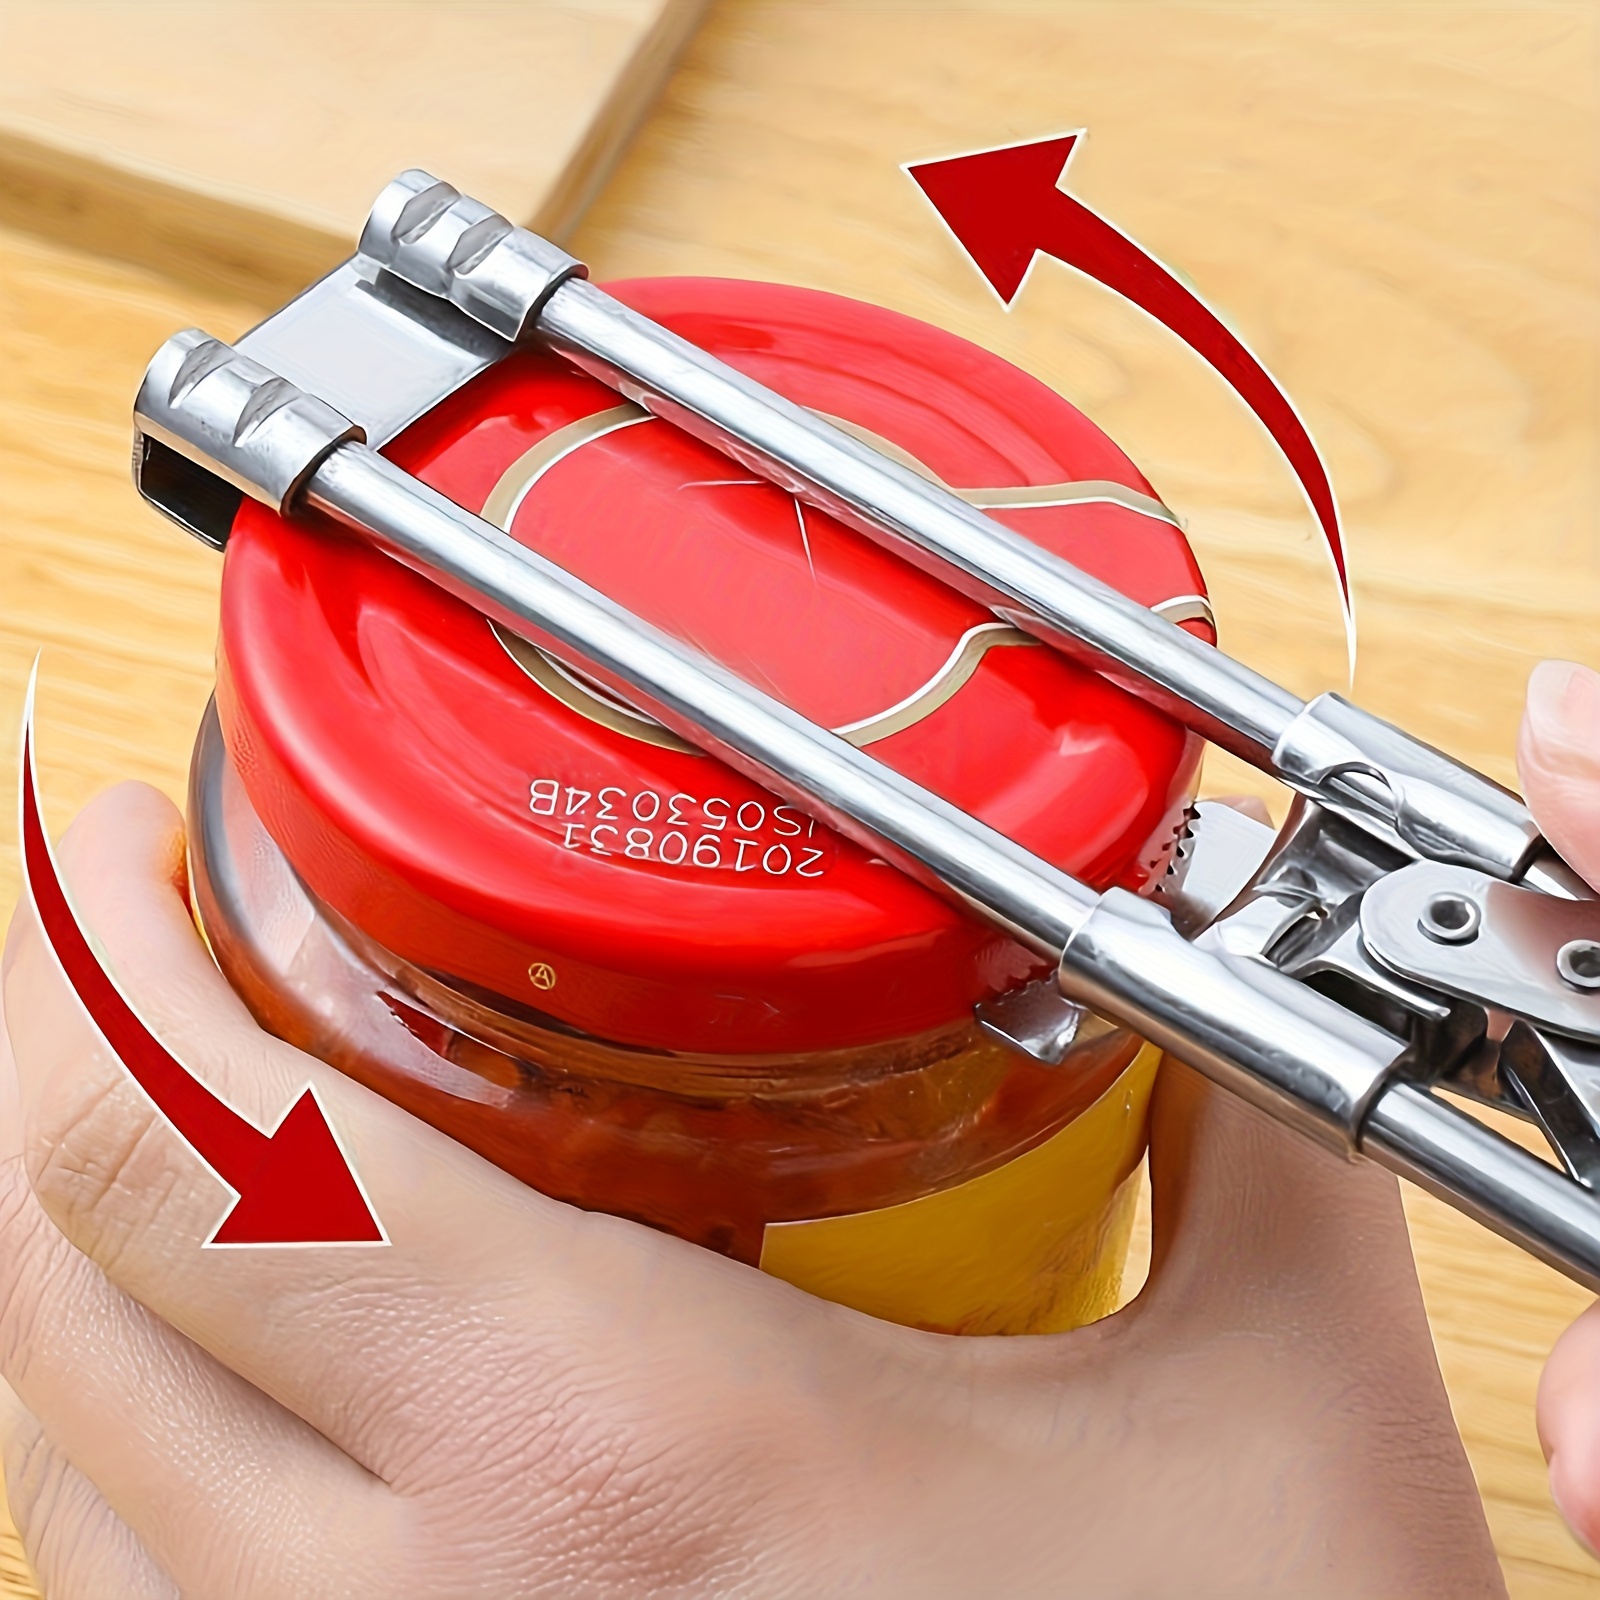 home canned cap multifunctional 4 in 1 &can openers bottle openers